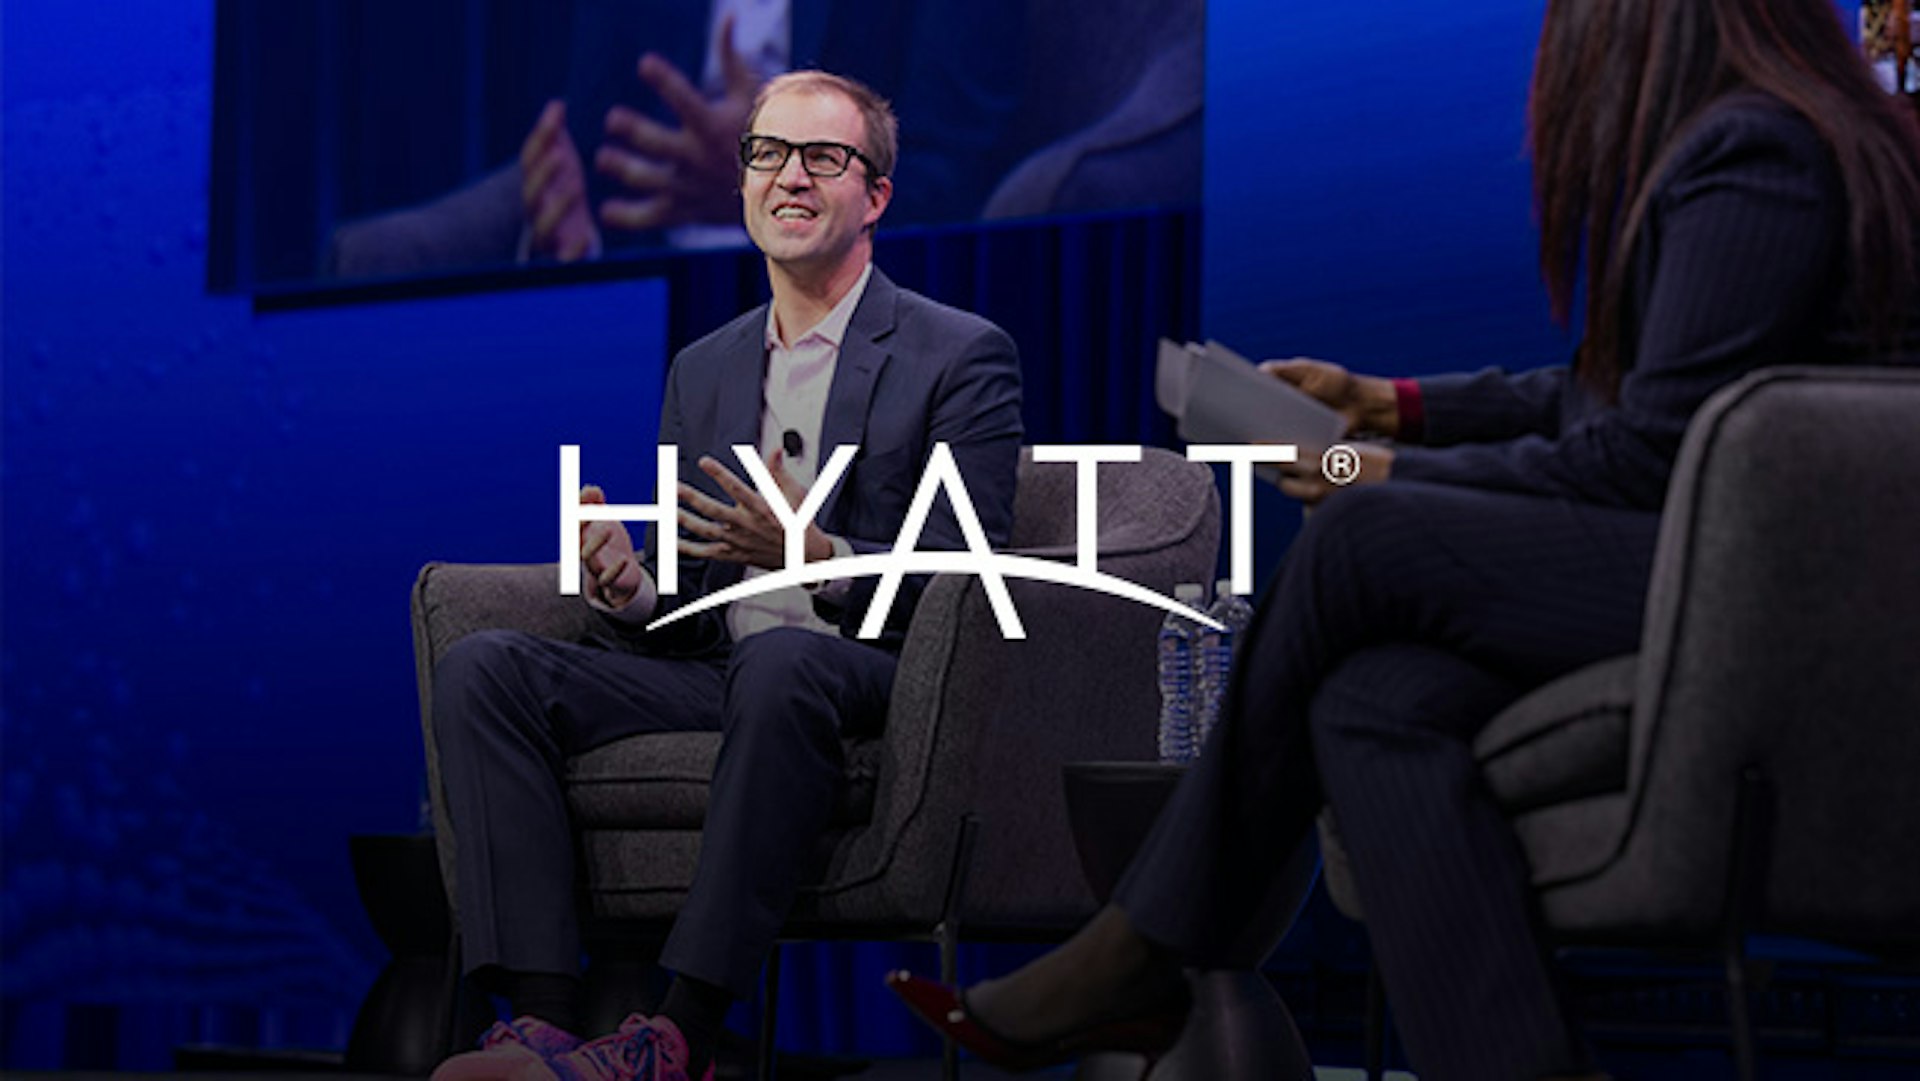 Zenith Live '23 CXO Chat: Securing the Digital Future Together with Hyatt and Zscaler